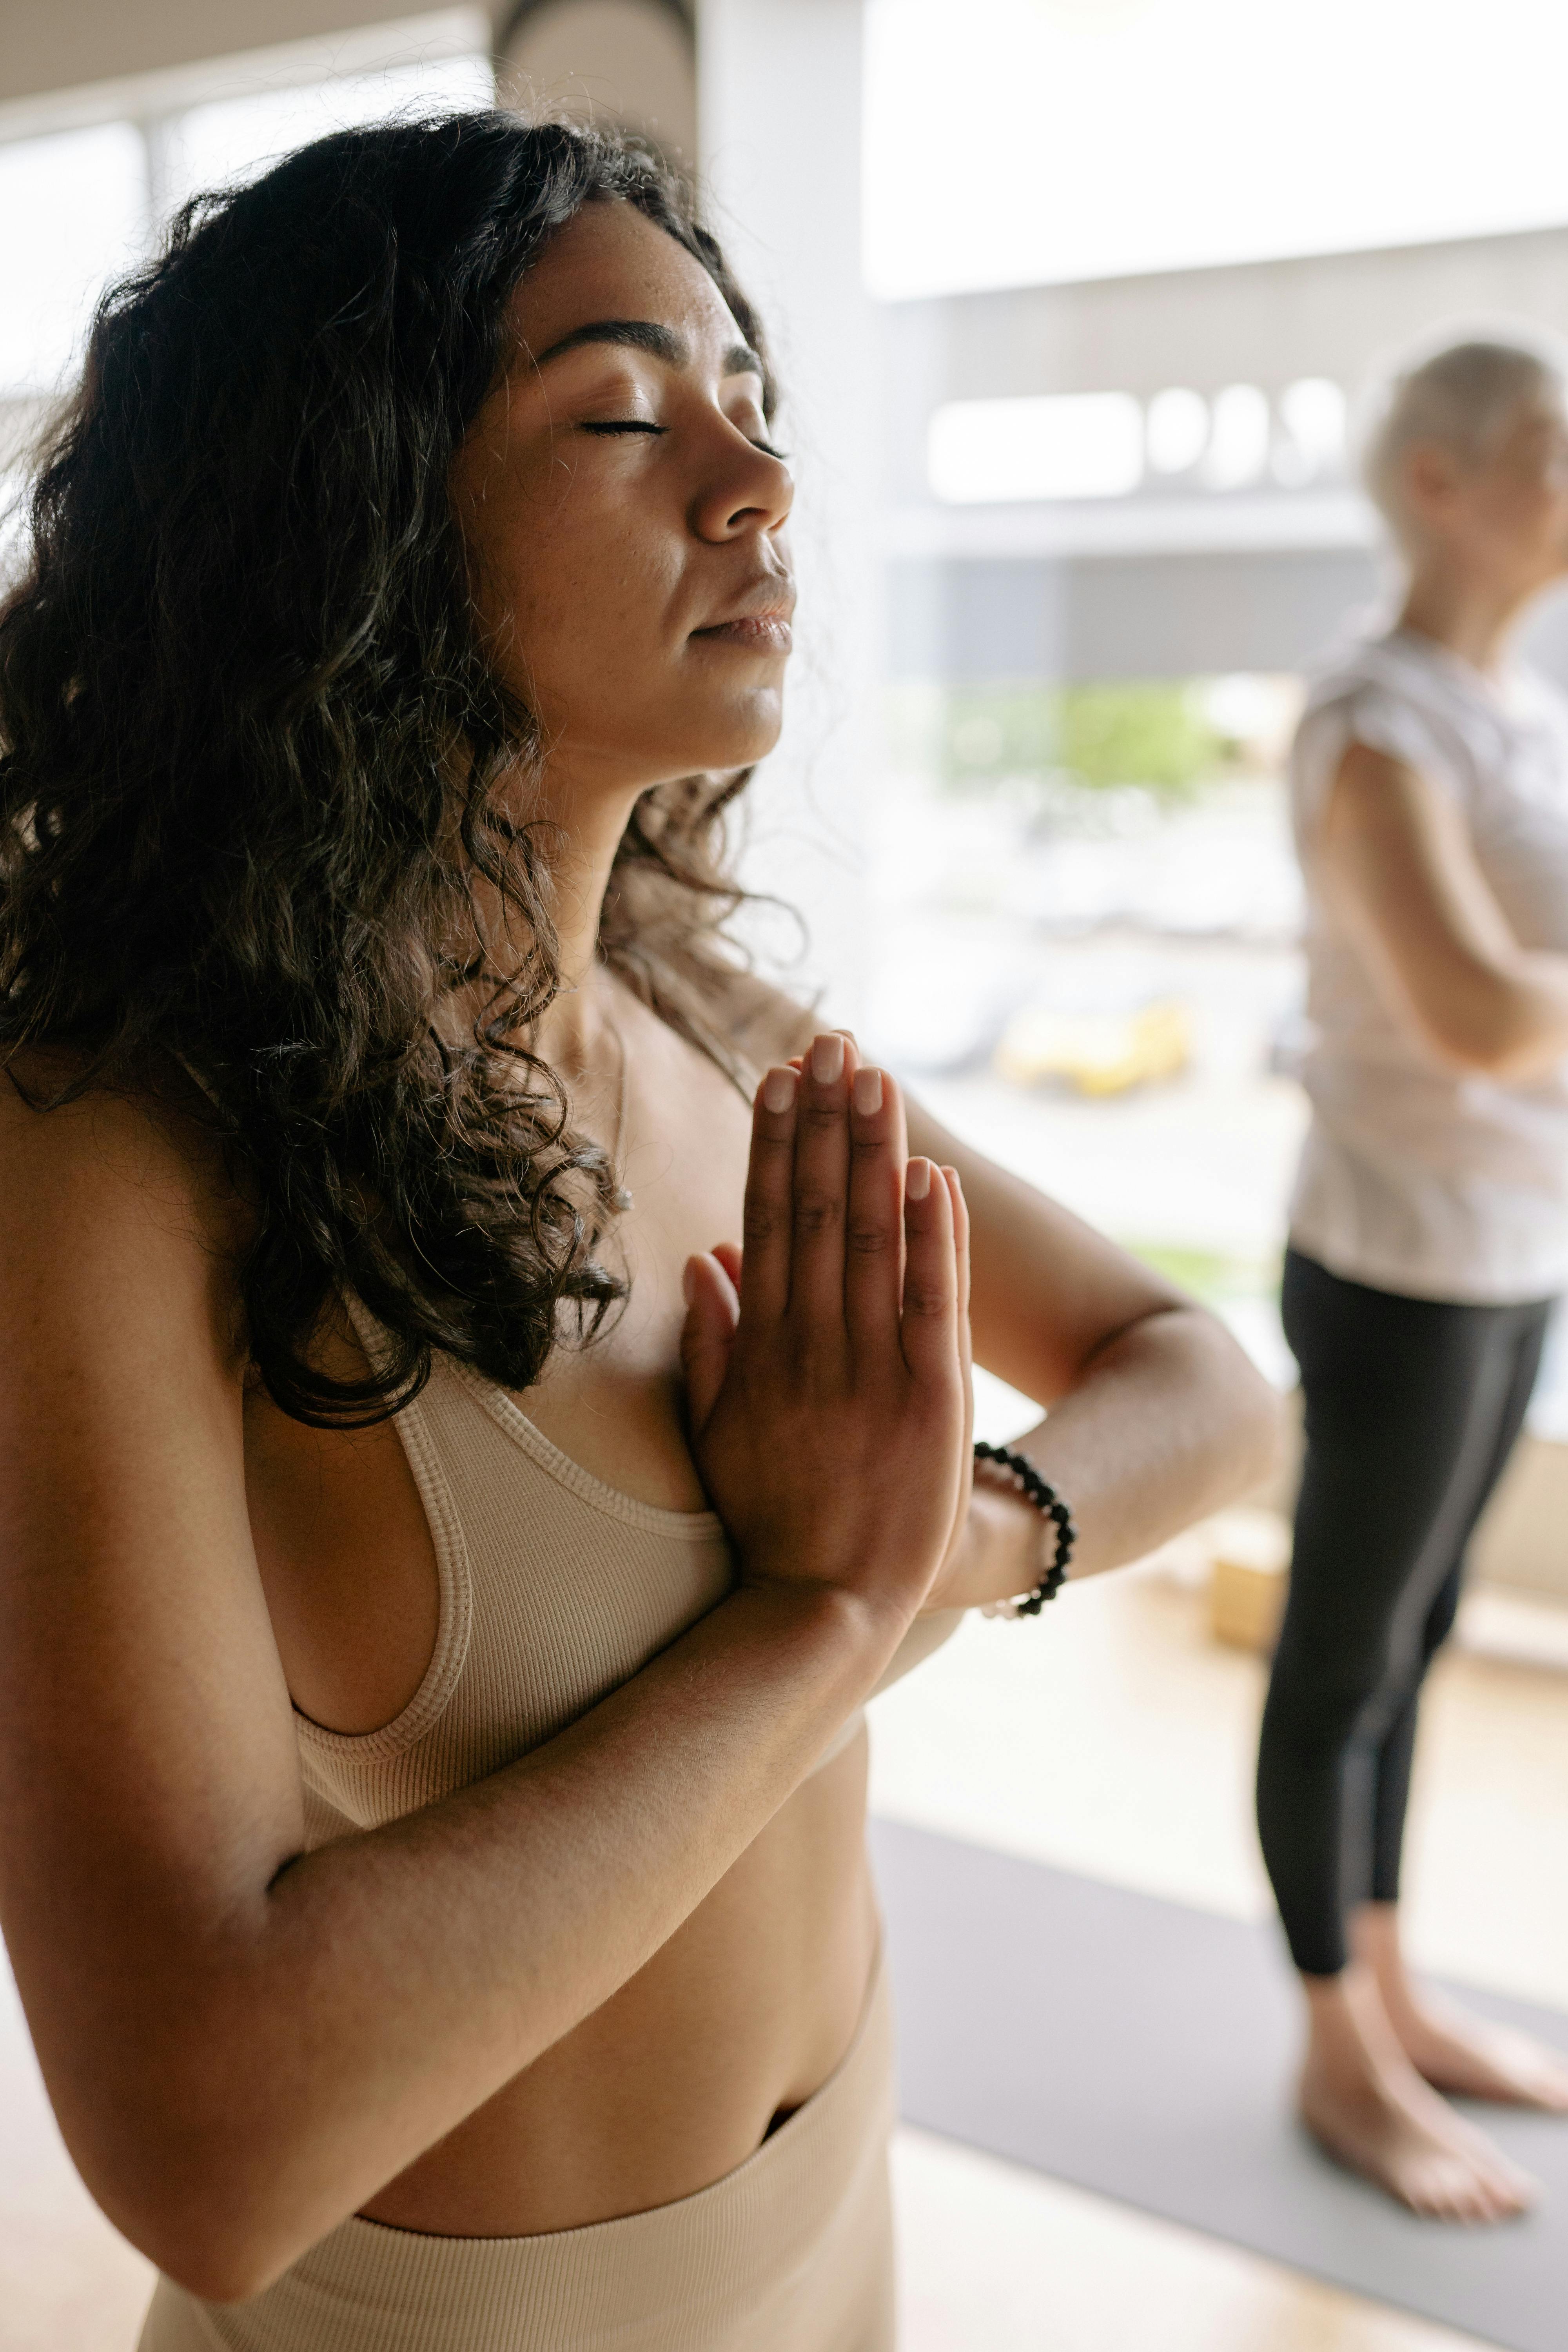 Namaste Everyone. Portrait Shot of Two Young Fit Women Standing and Doing a Yoga  Pose while Looking at the Camera Inside Stock Image - Image of interior,  ethnic: 261298489